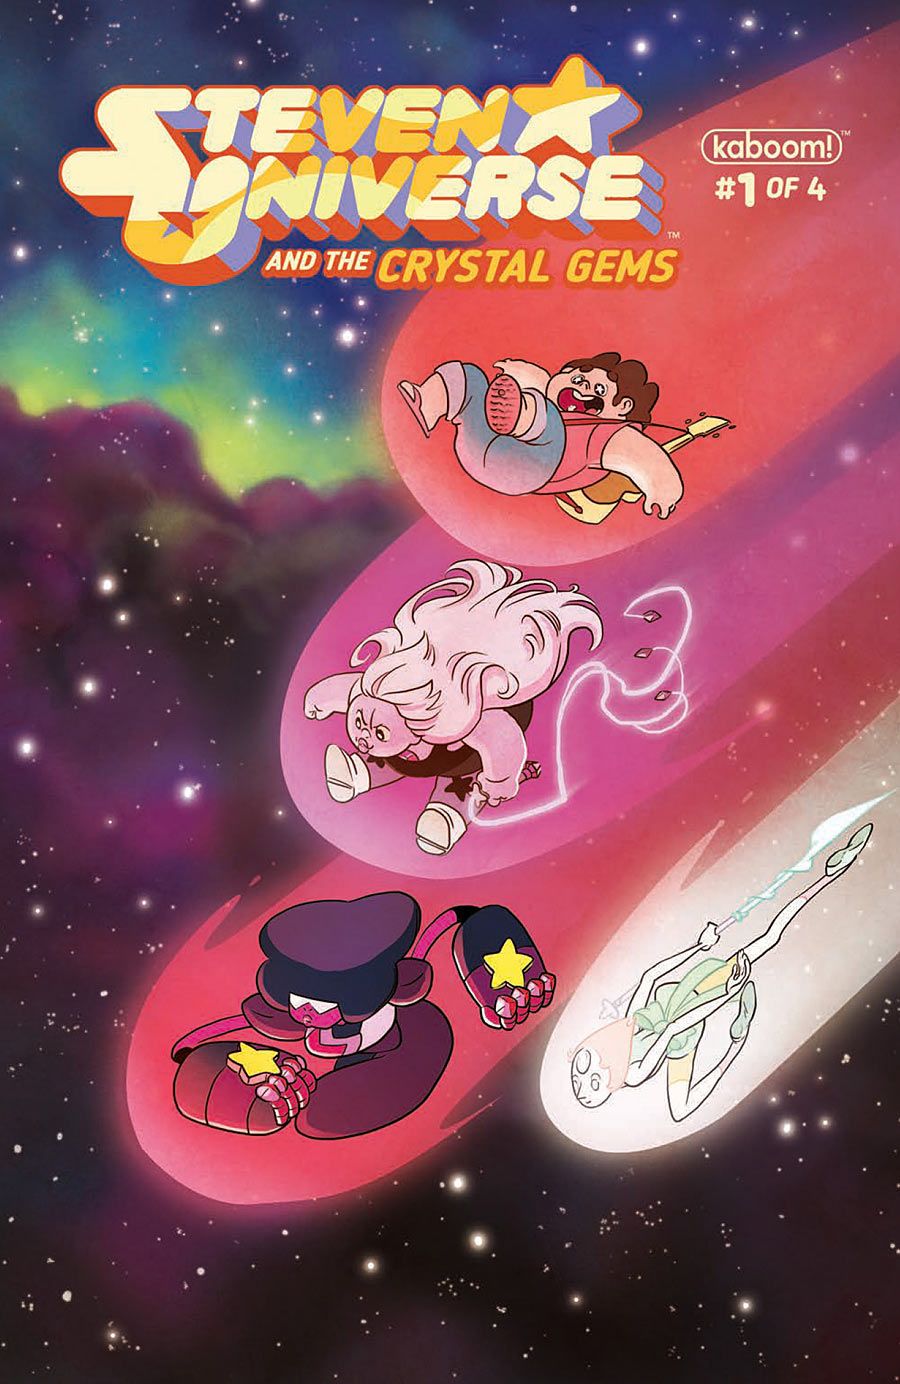 Steven Universe and the Crystal Gems #1 Comic